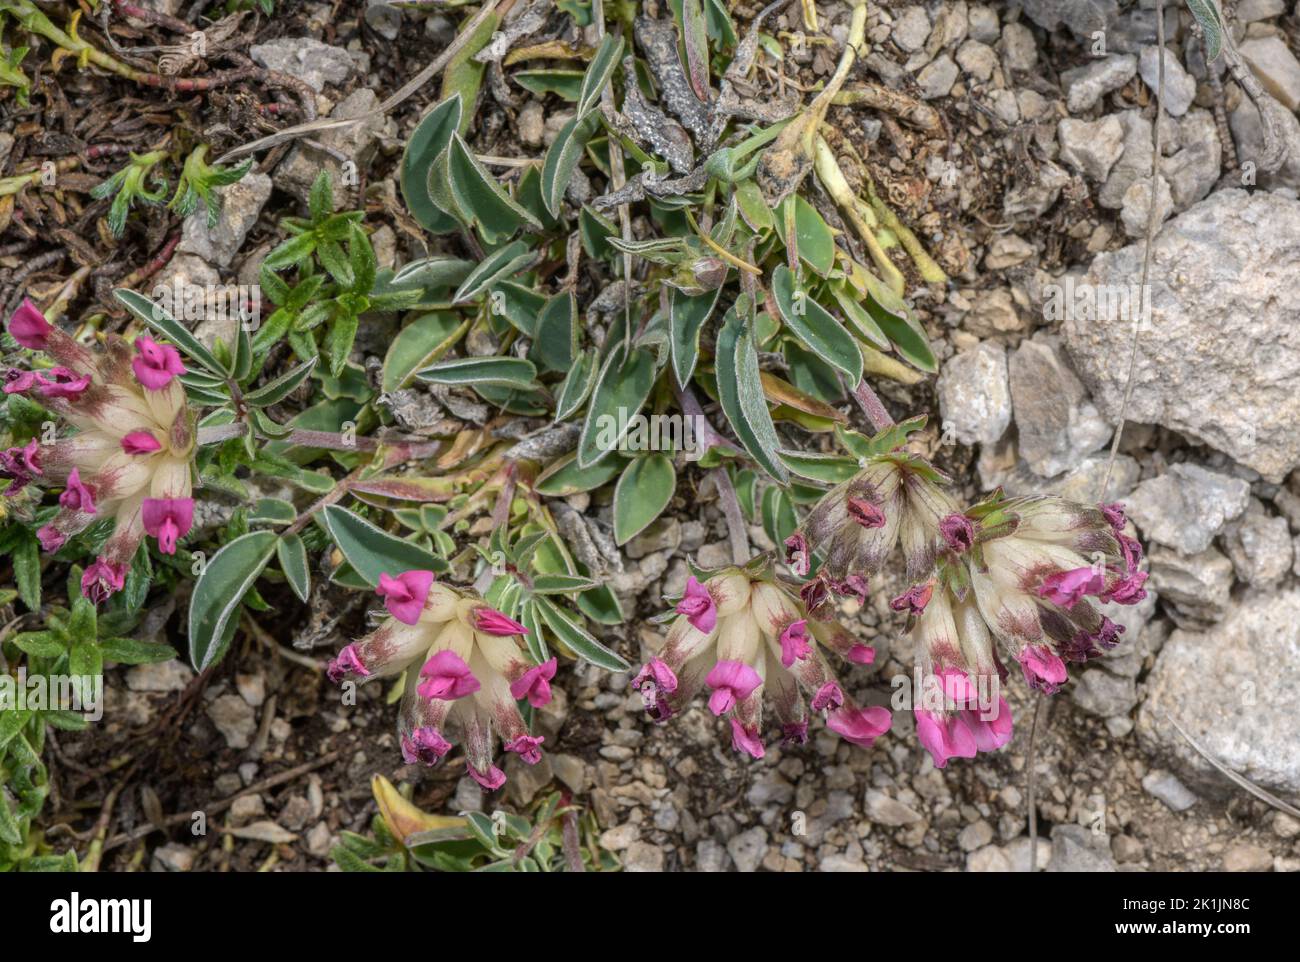 Kidney Vetch in its pink Pyrenean form, Anthyllis vulneraria subsp. pyrenaica. Pyrenees. Stock Photo